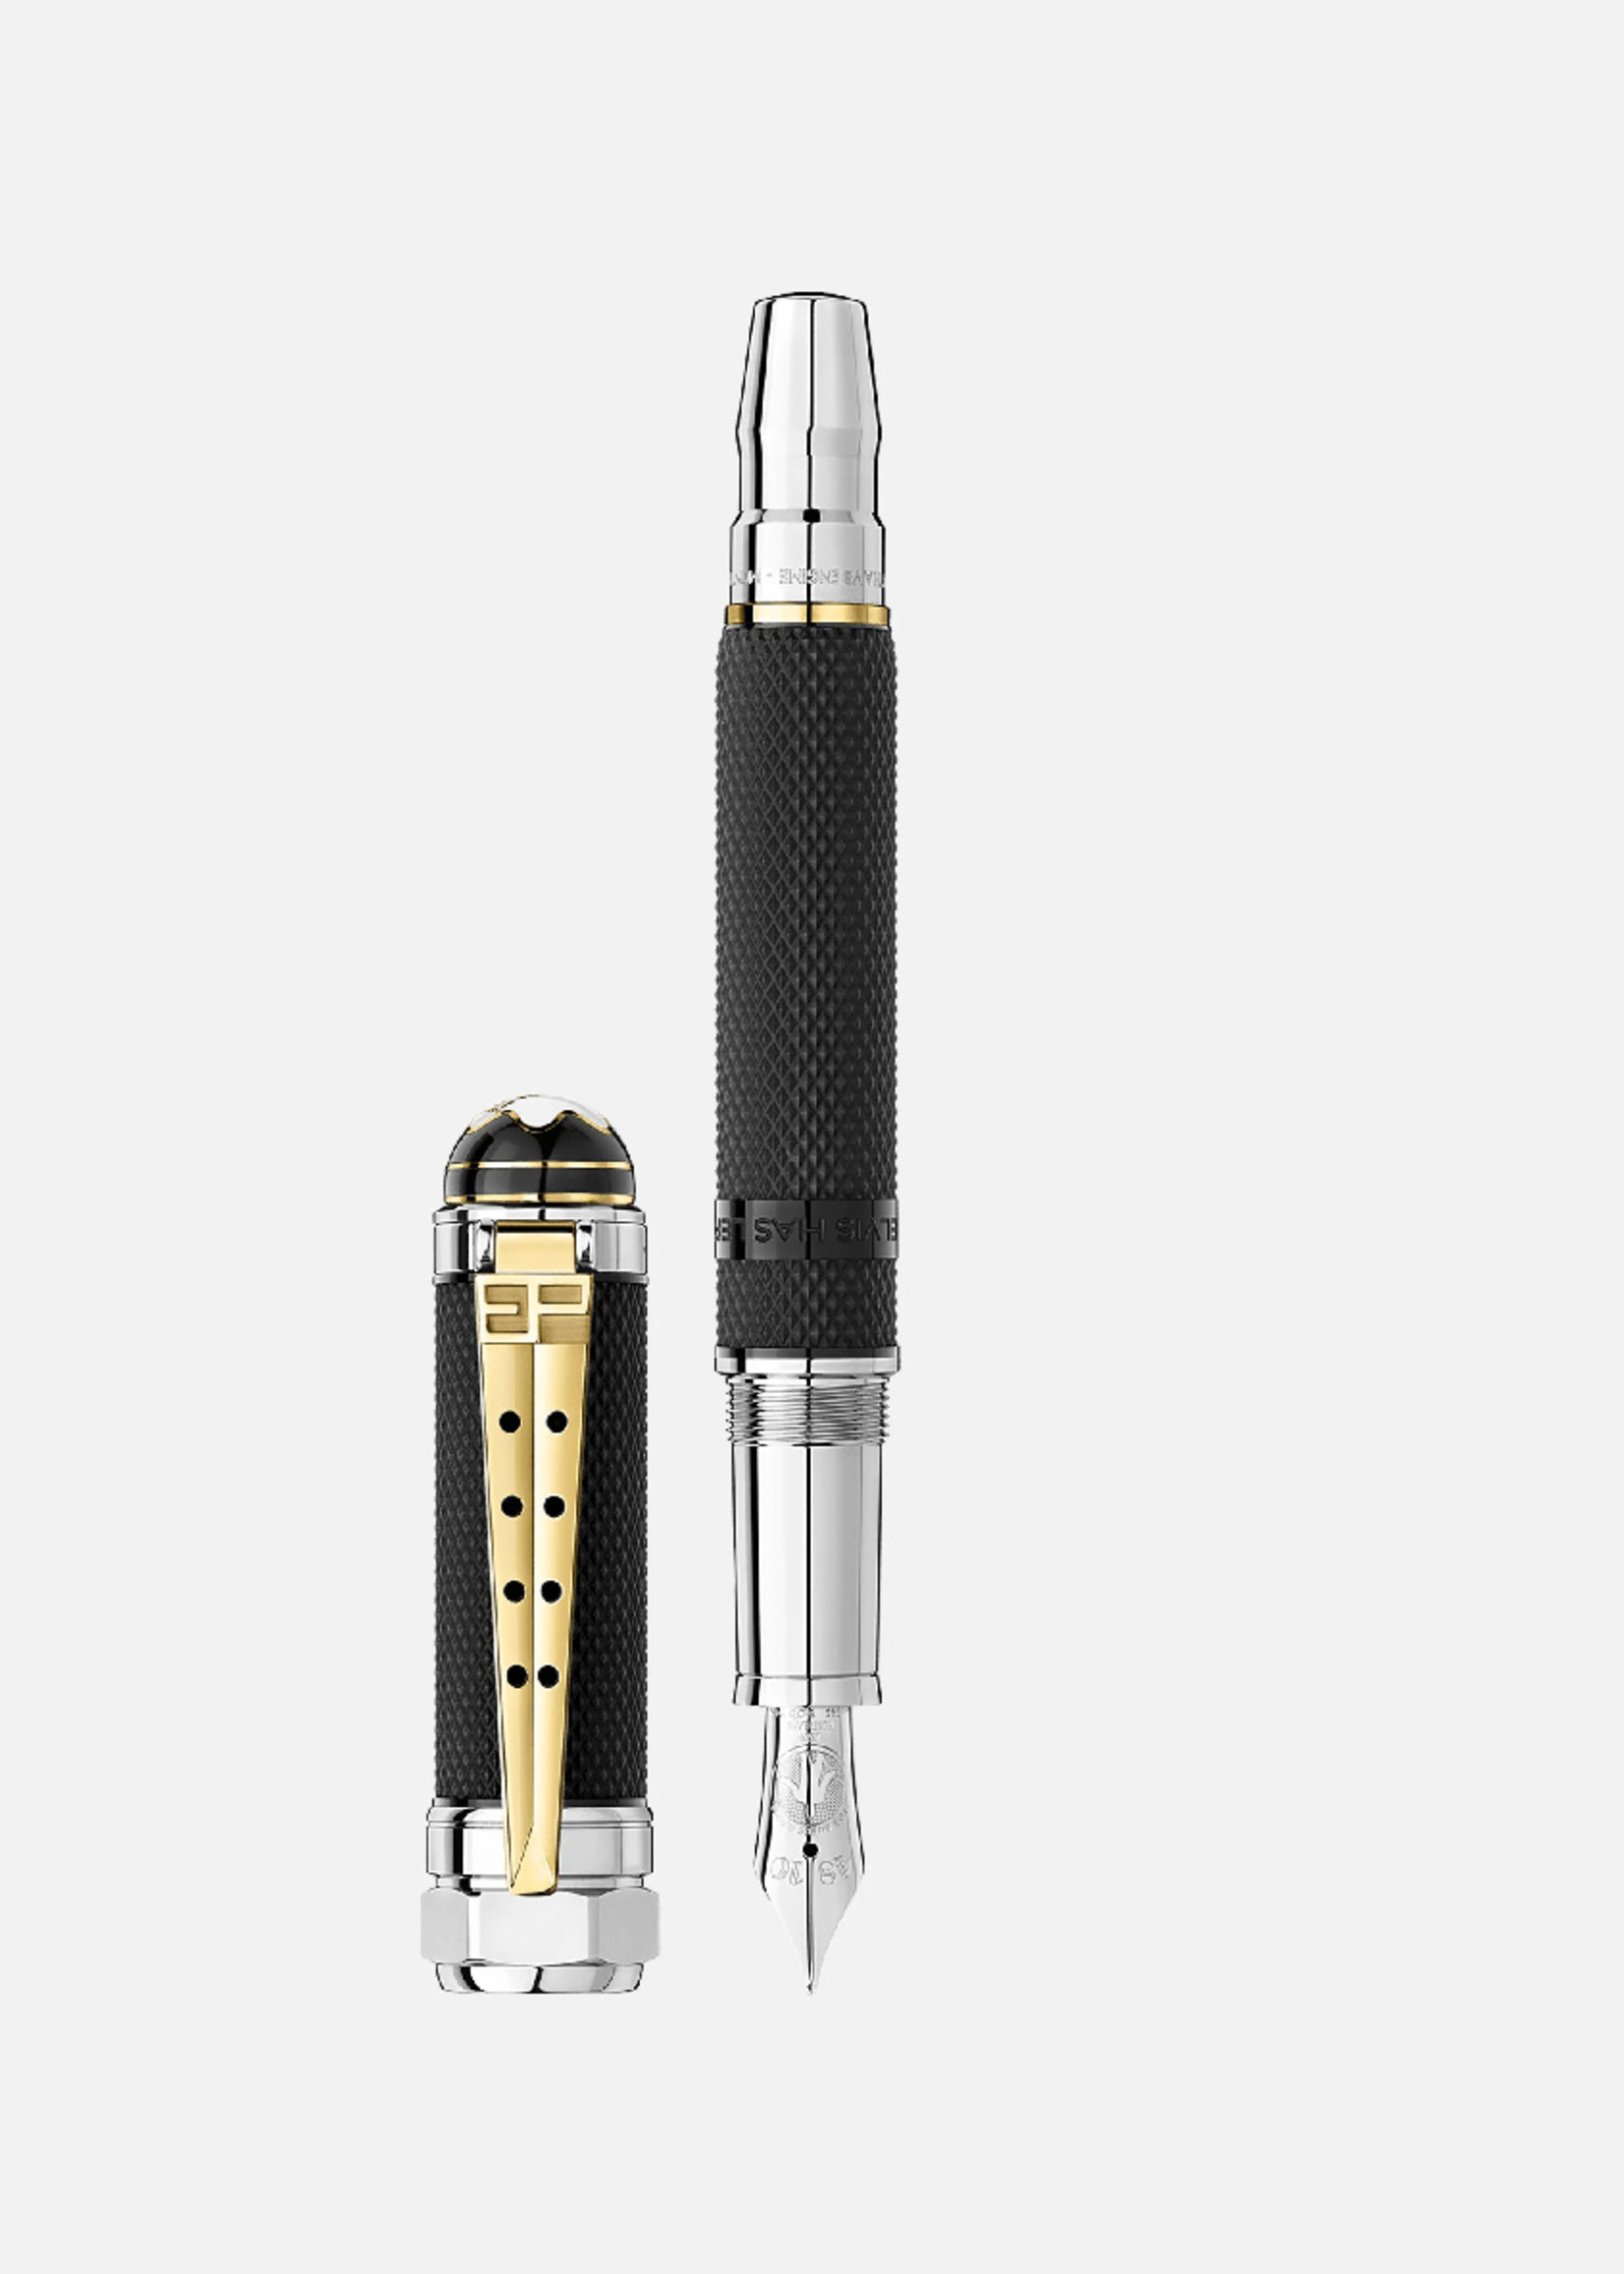 MONTBLANC Great Characters Elvis Presley Special Edition Vulpen M - Medium 0.62 mm 20% KORTING